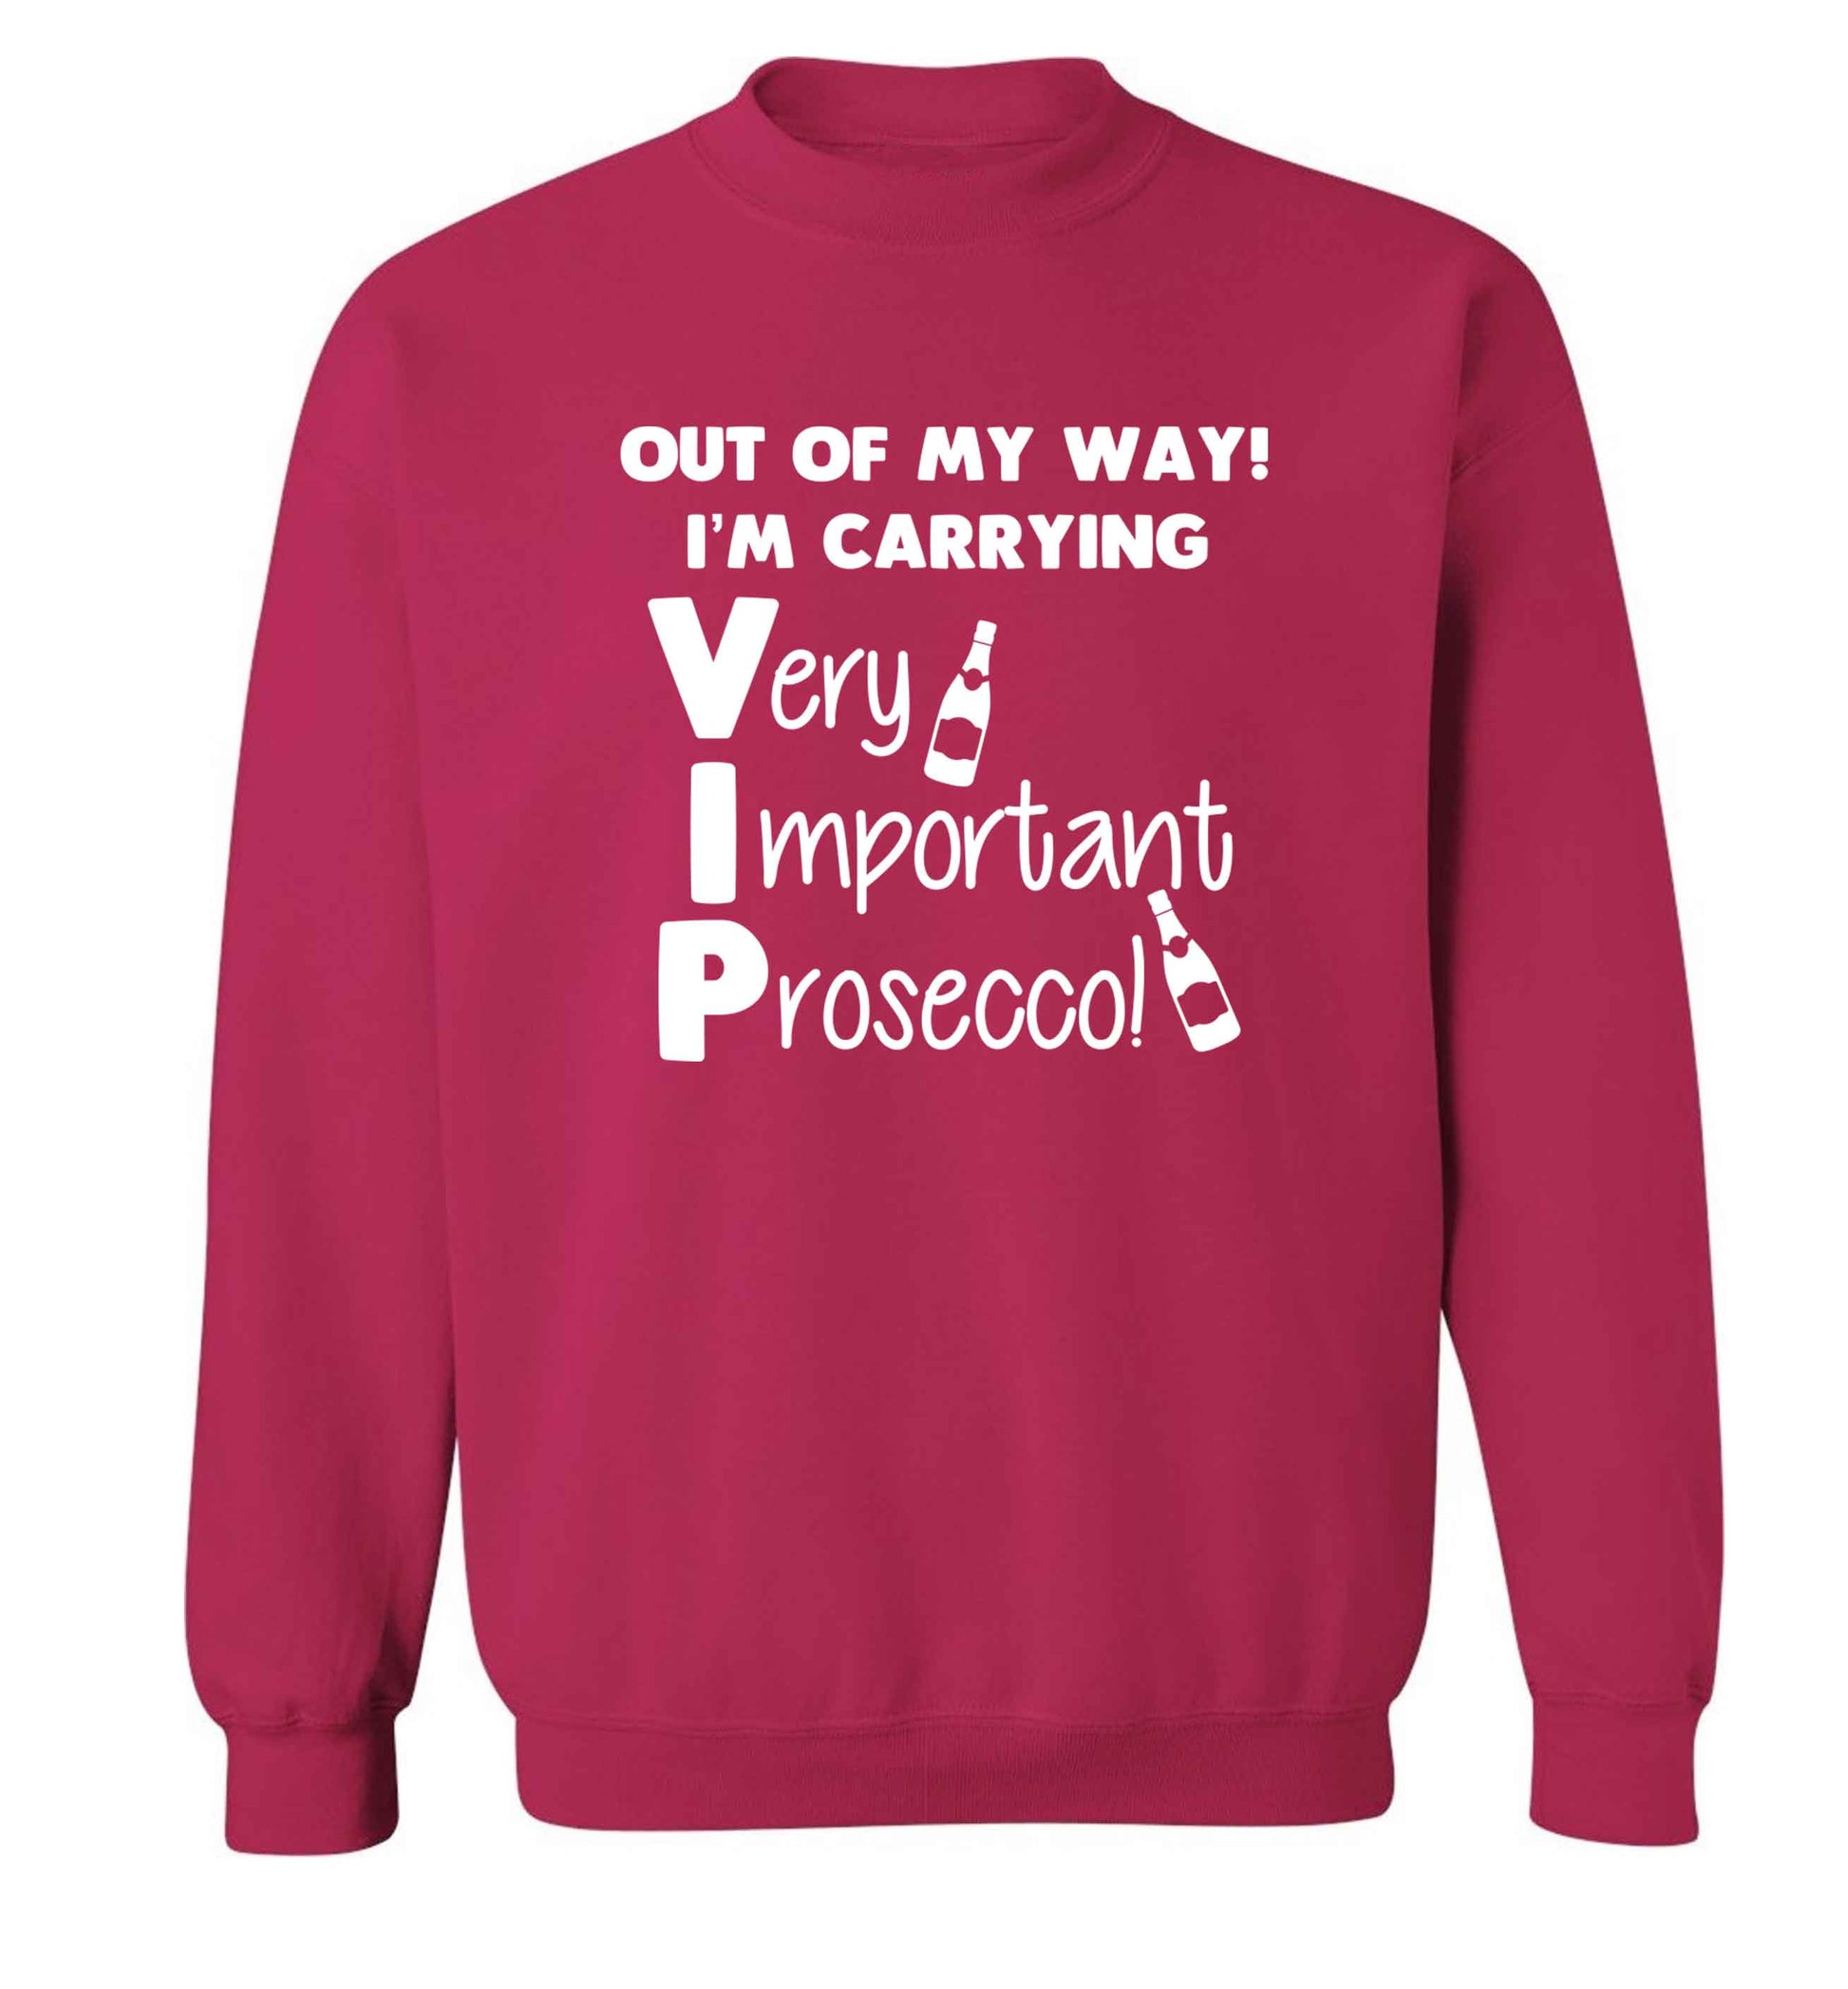 Out of my way I'm carrying very important prosecco! adult's unisex pink sweater 2XL